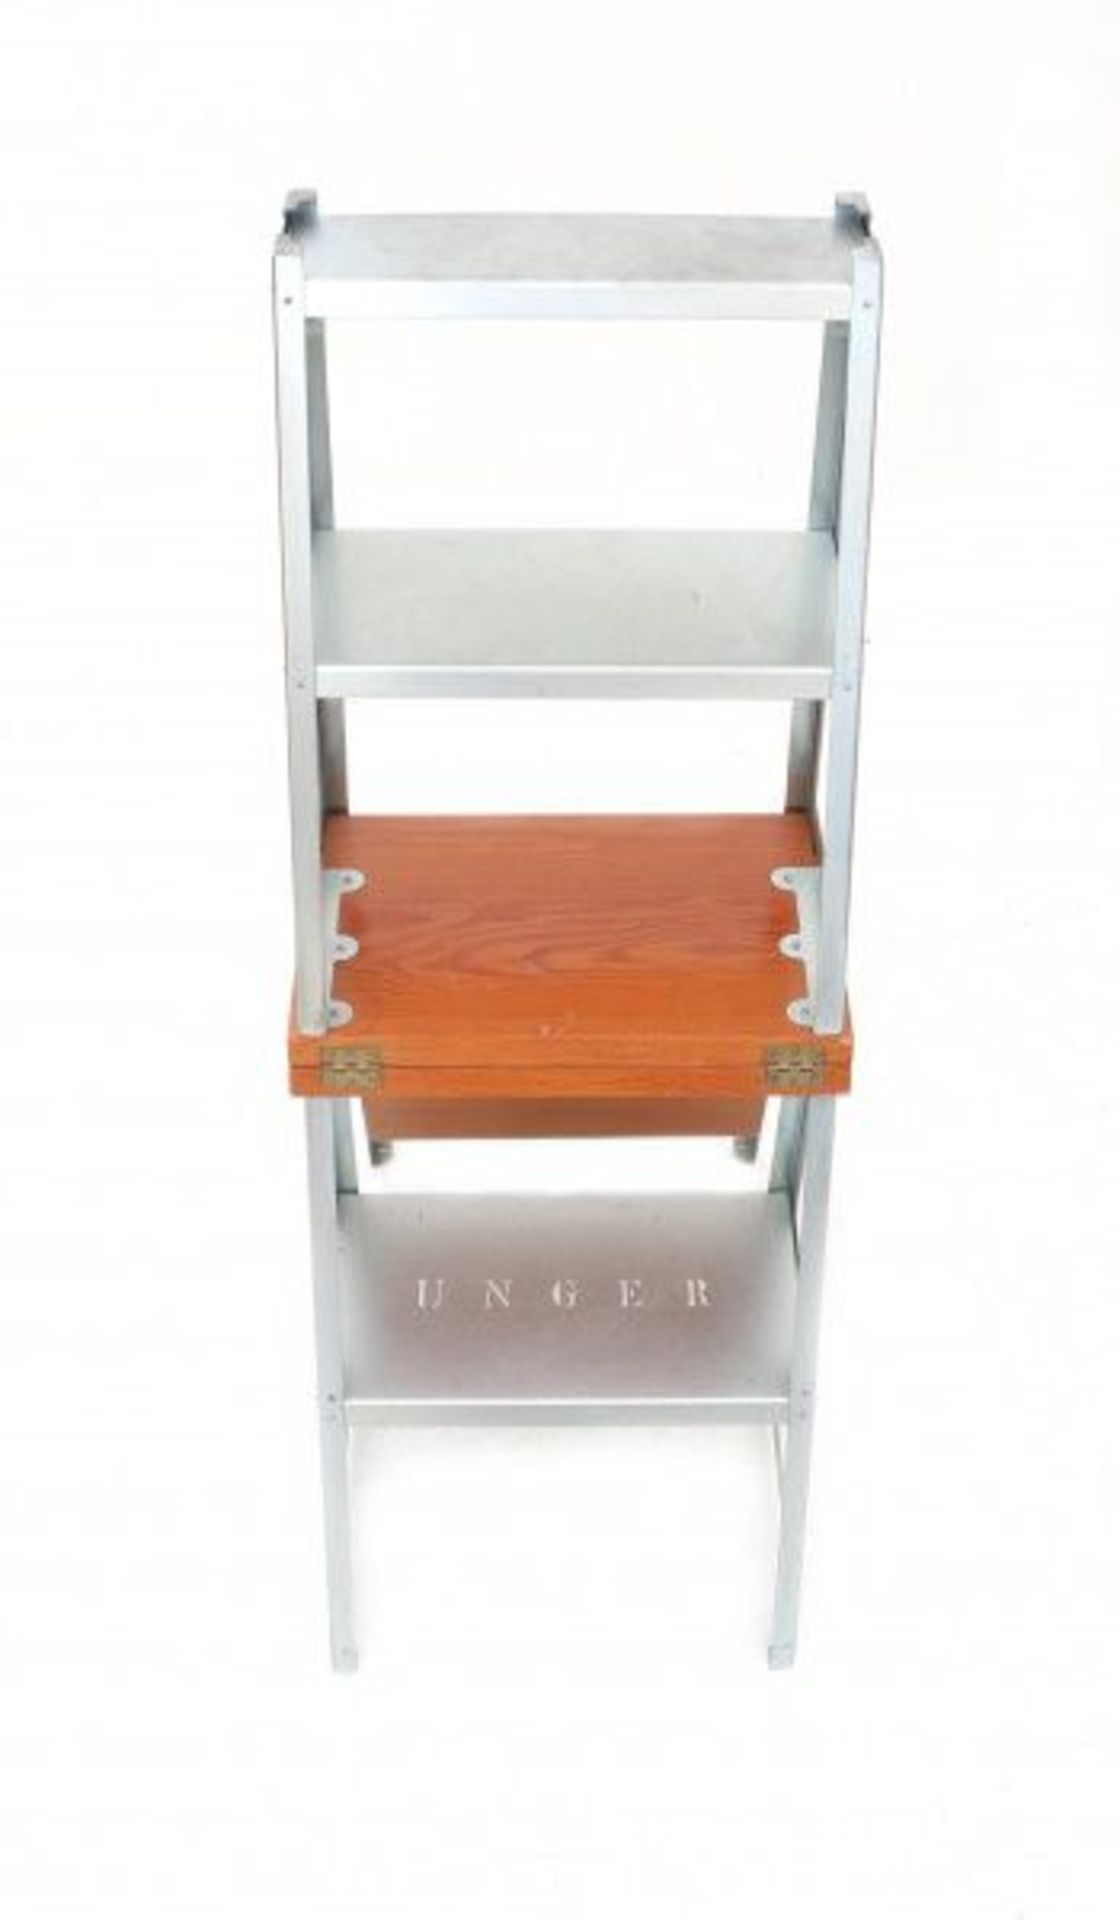 Piet Hein Eek (1967)A metal and wooden library stairs/chair 'Trapstoeltje' with cut out last name